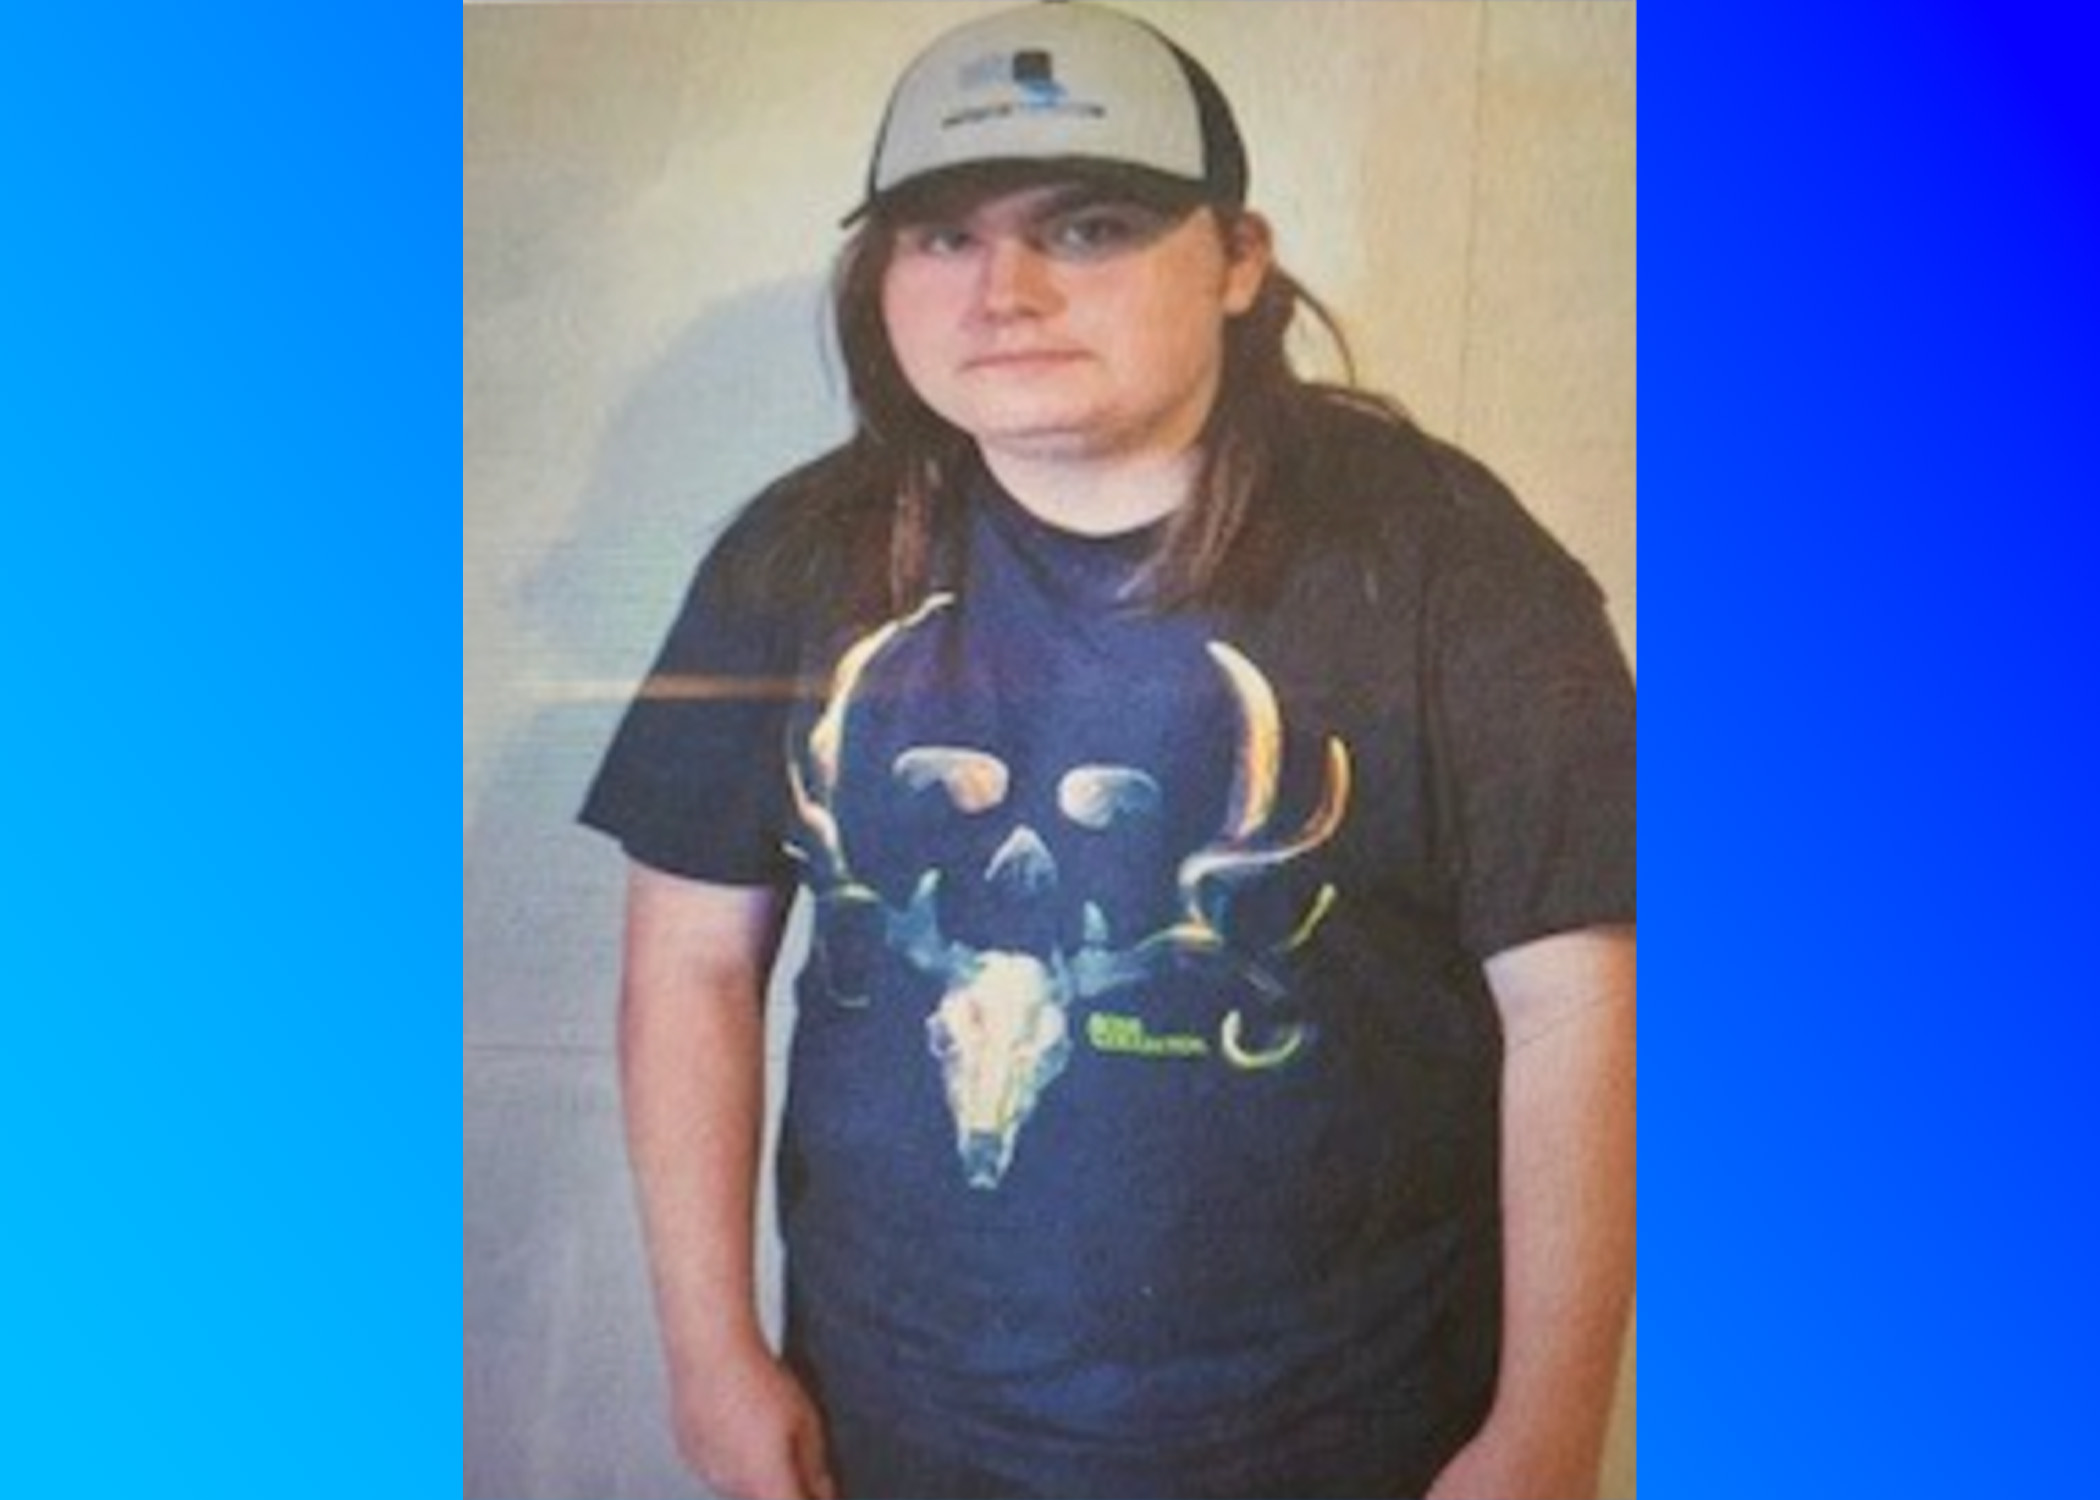 UPDATE: Missing 16-year-old from St. Clair County found safe